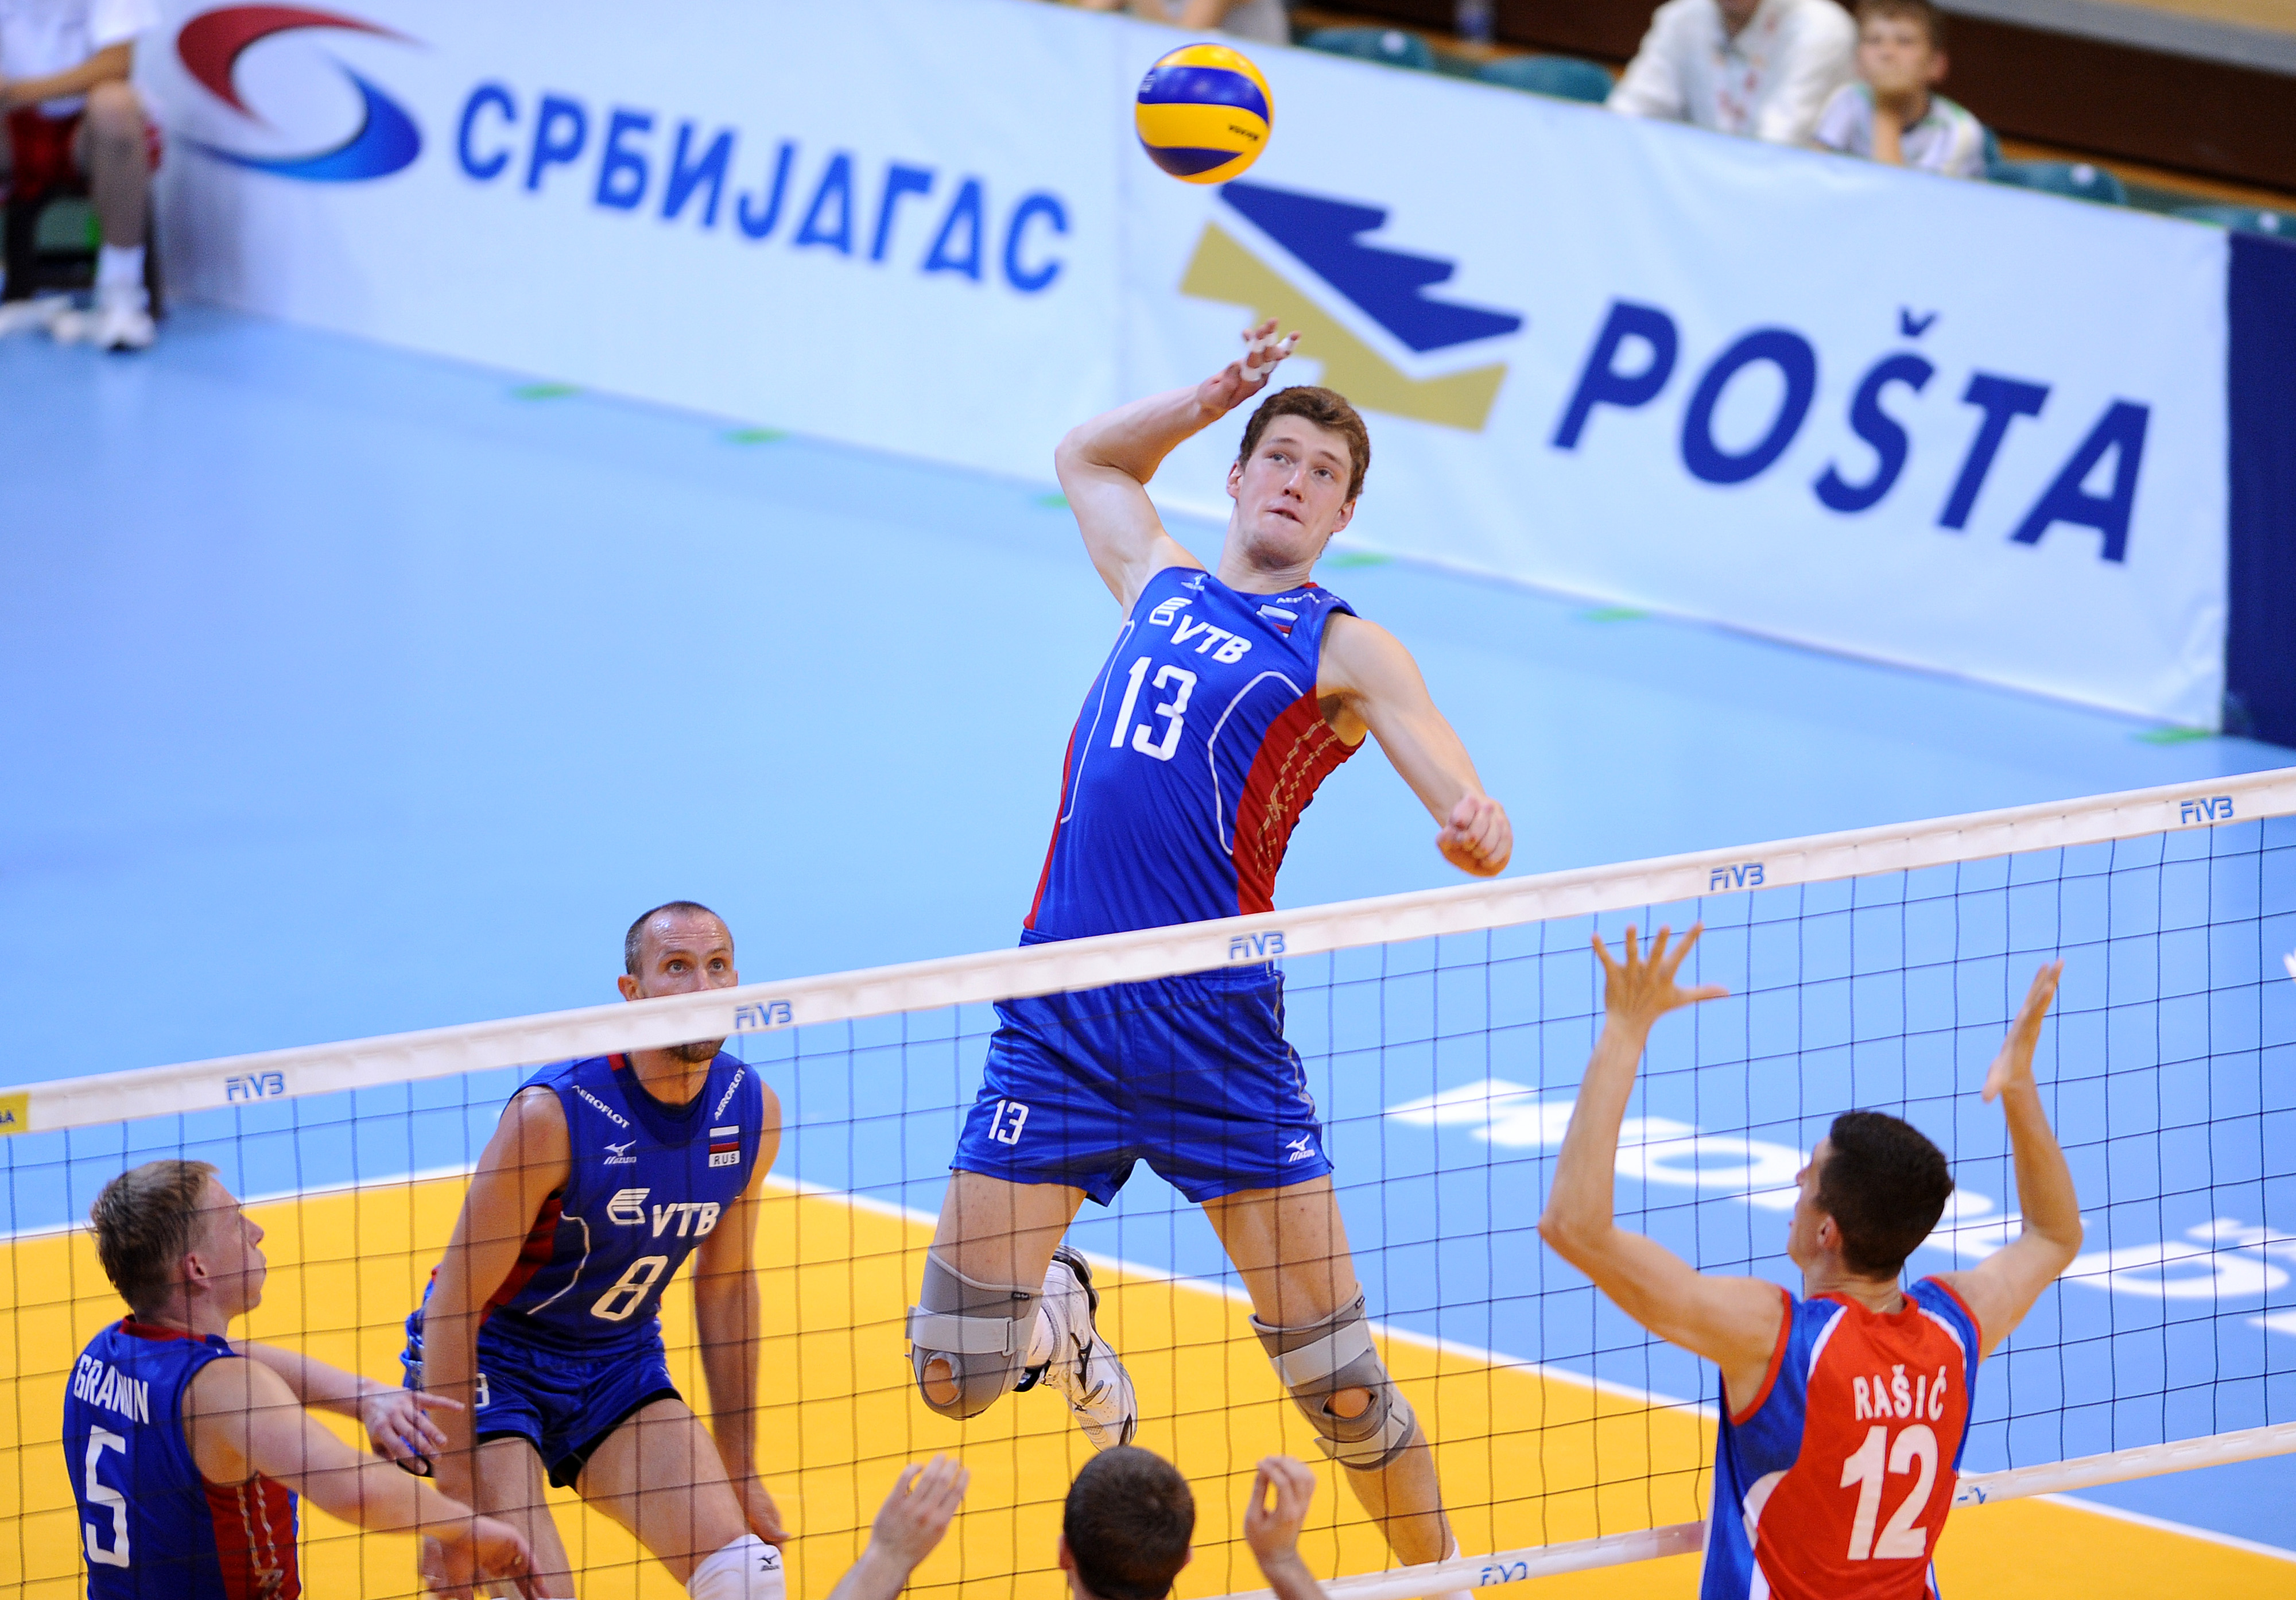 Dmitriy	Muserskiy of Russia ready to score